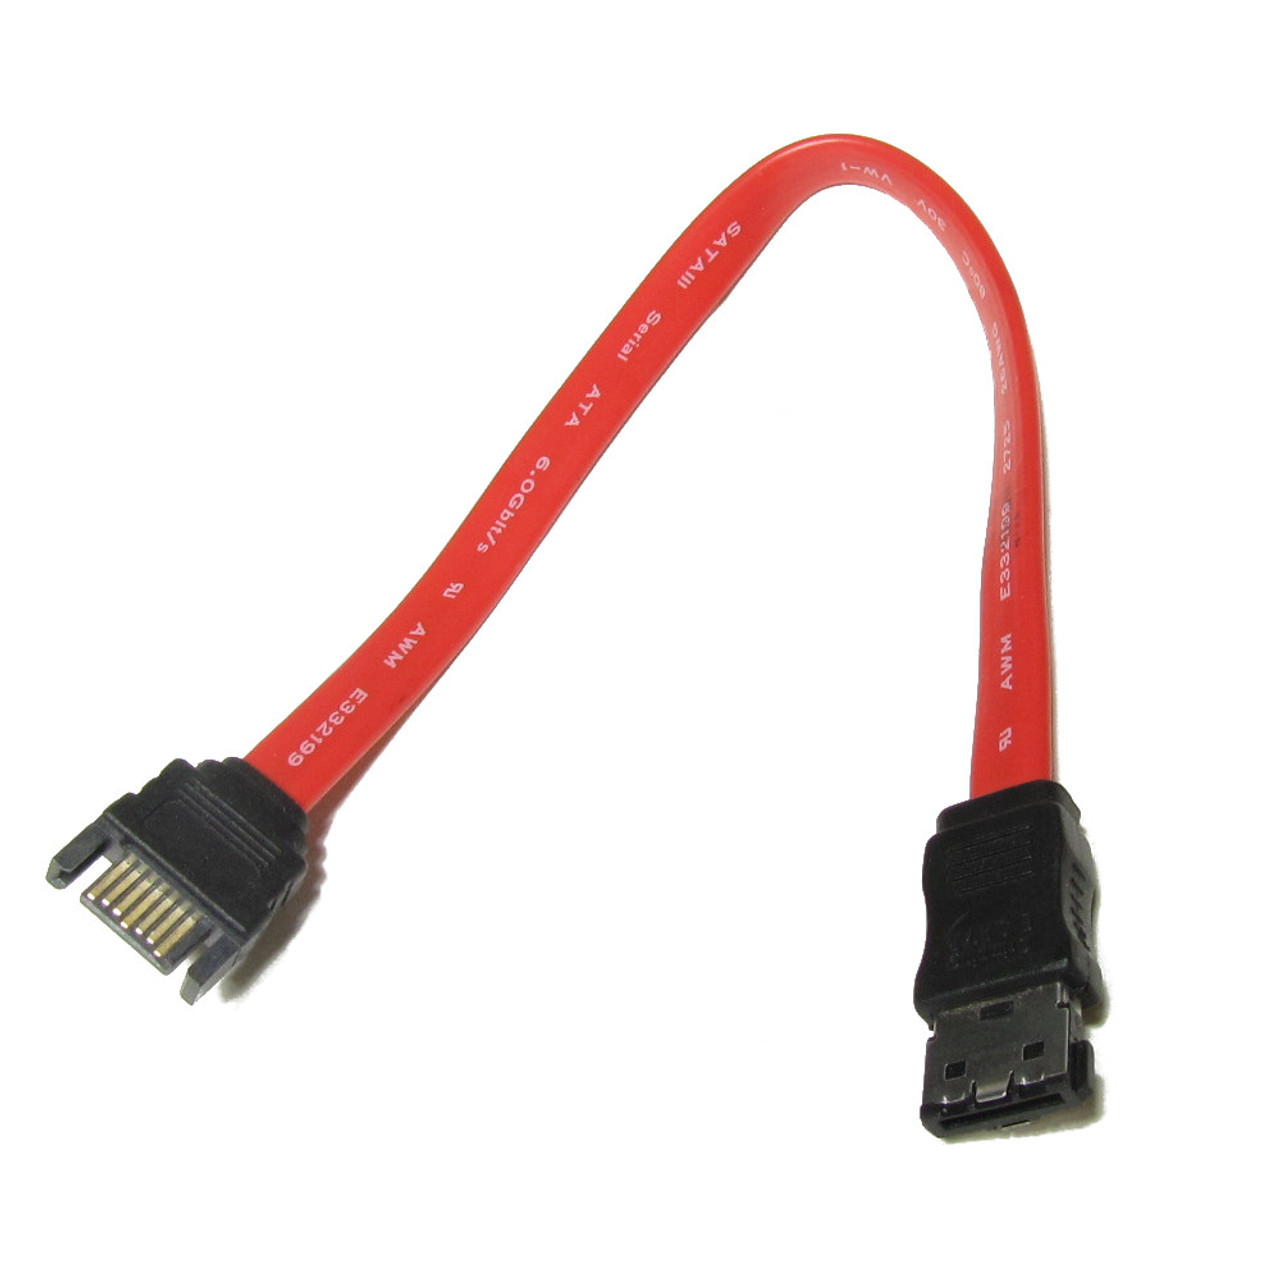 Trying to make a custom sata cable from scratch I finished it, I